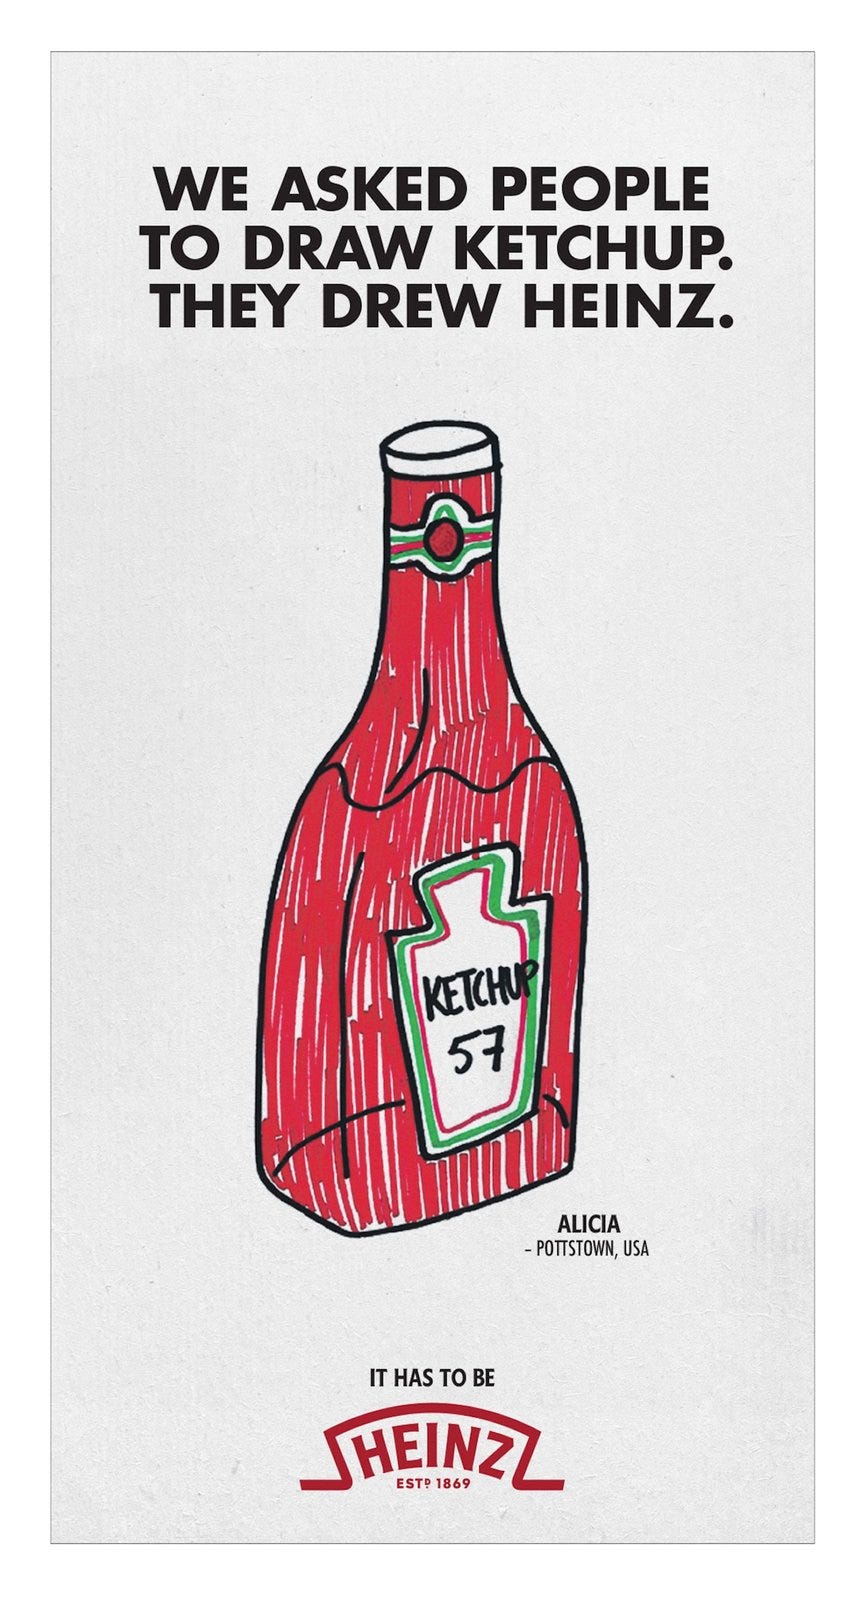 Heinz — Draw Ketchup (Ketchup = Heinz), by Vejay Anand